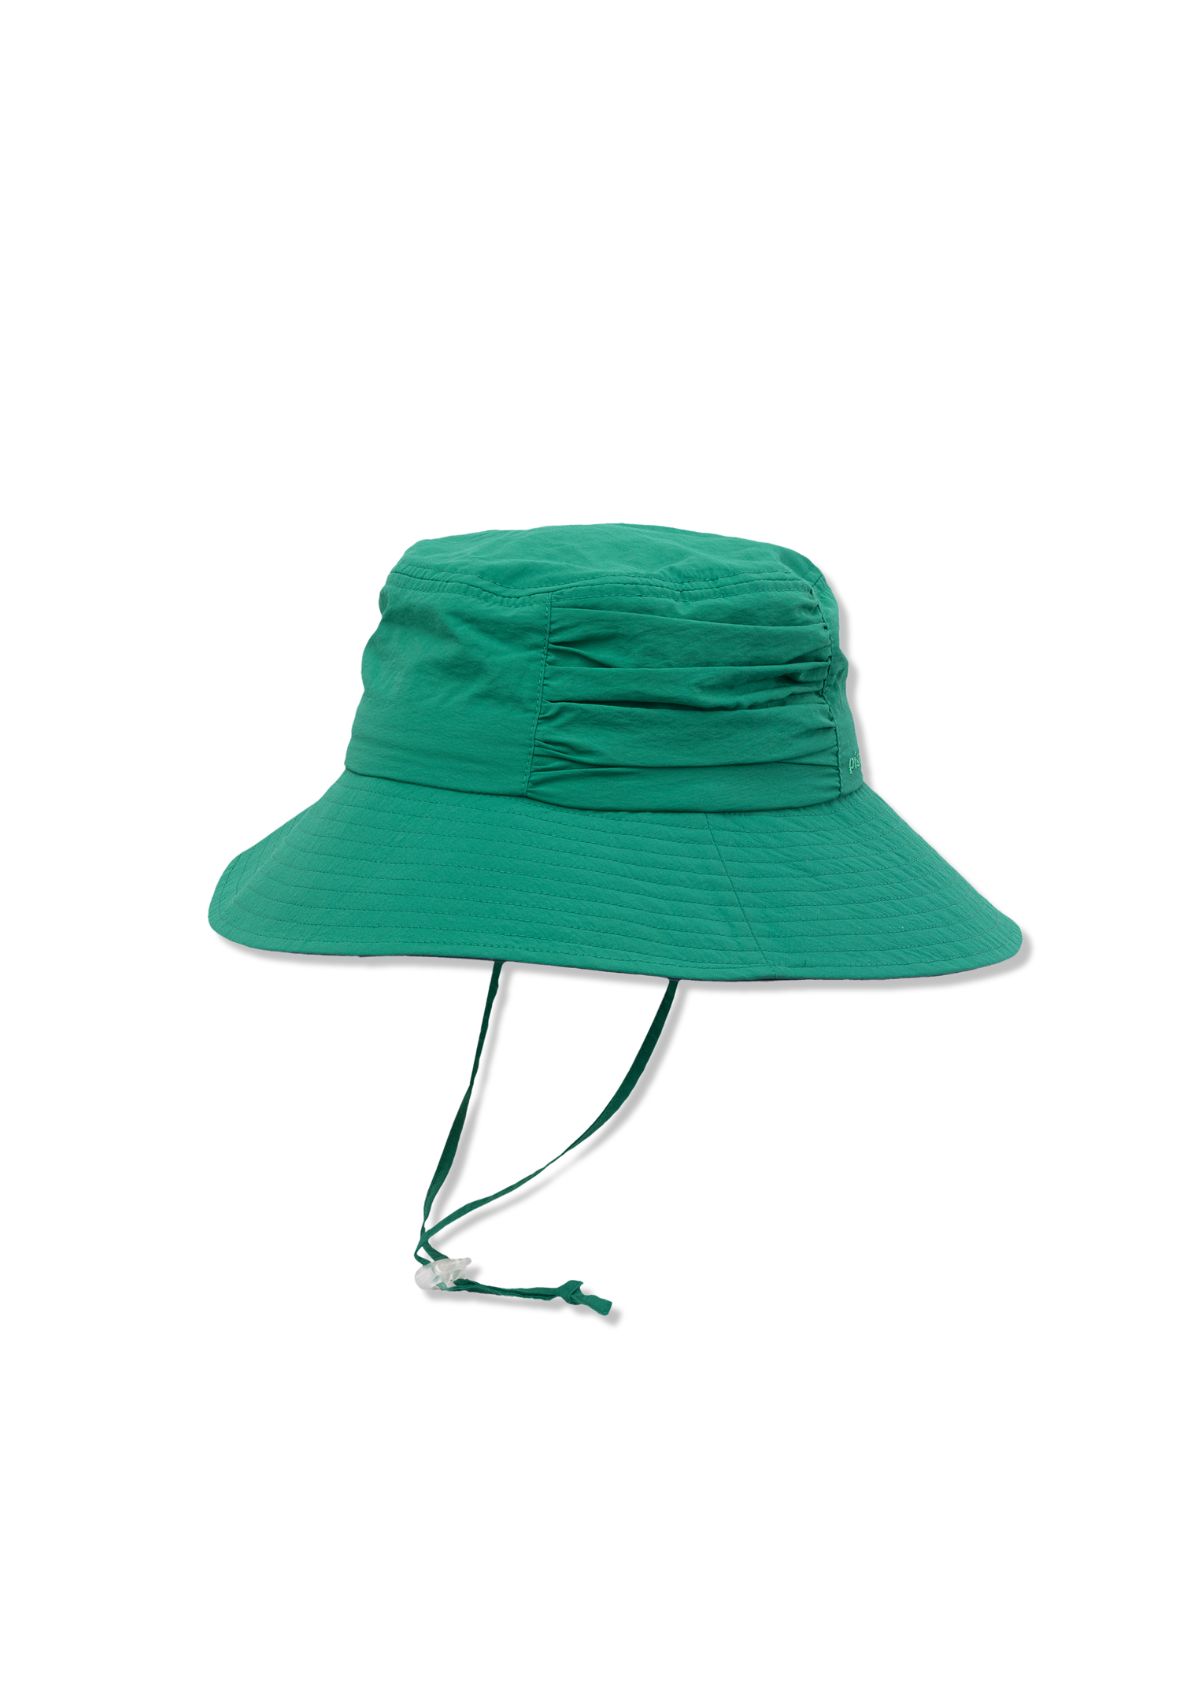 Dover Wide Brim Fabric Sun Hat with UPF 50+ Detachable Chin Cord - Jade -Pistil /Fox River/ FTP Designs / Isotoner / Totes- Ruby Jane-